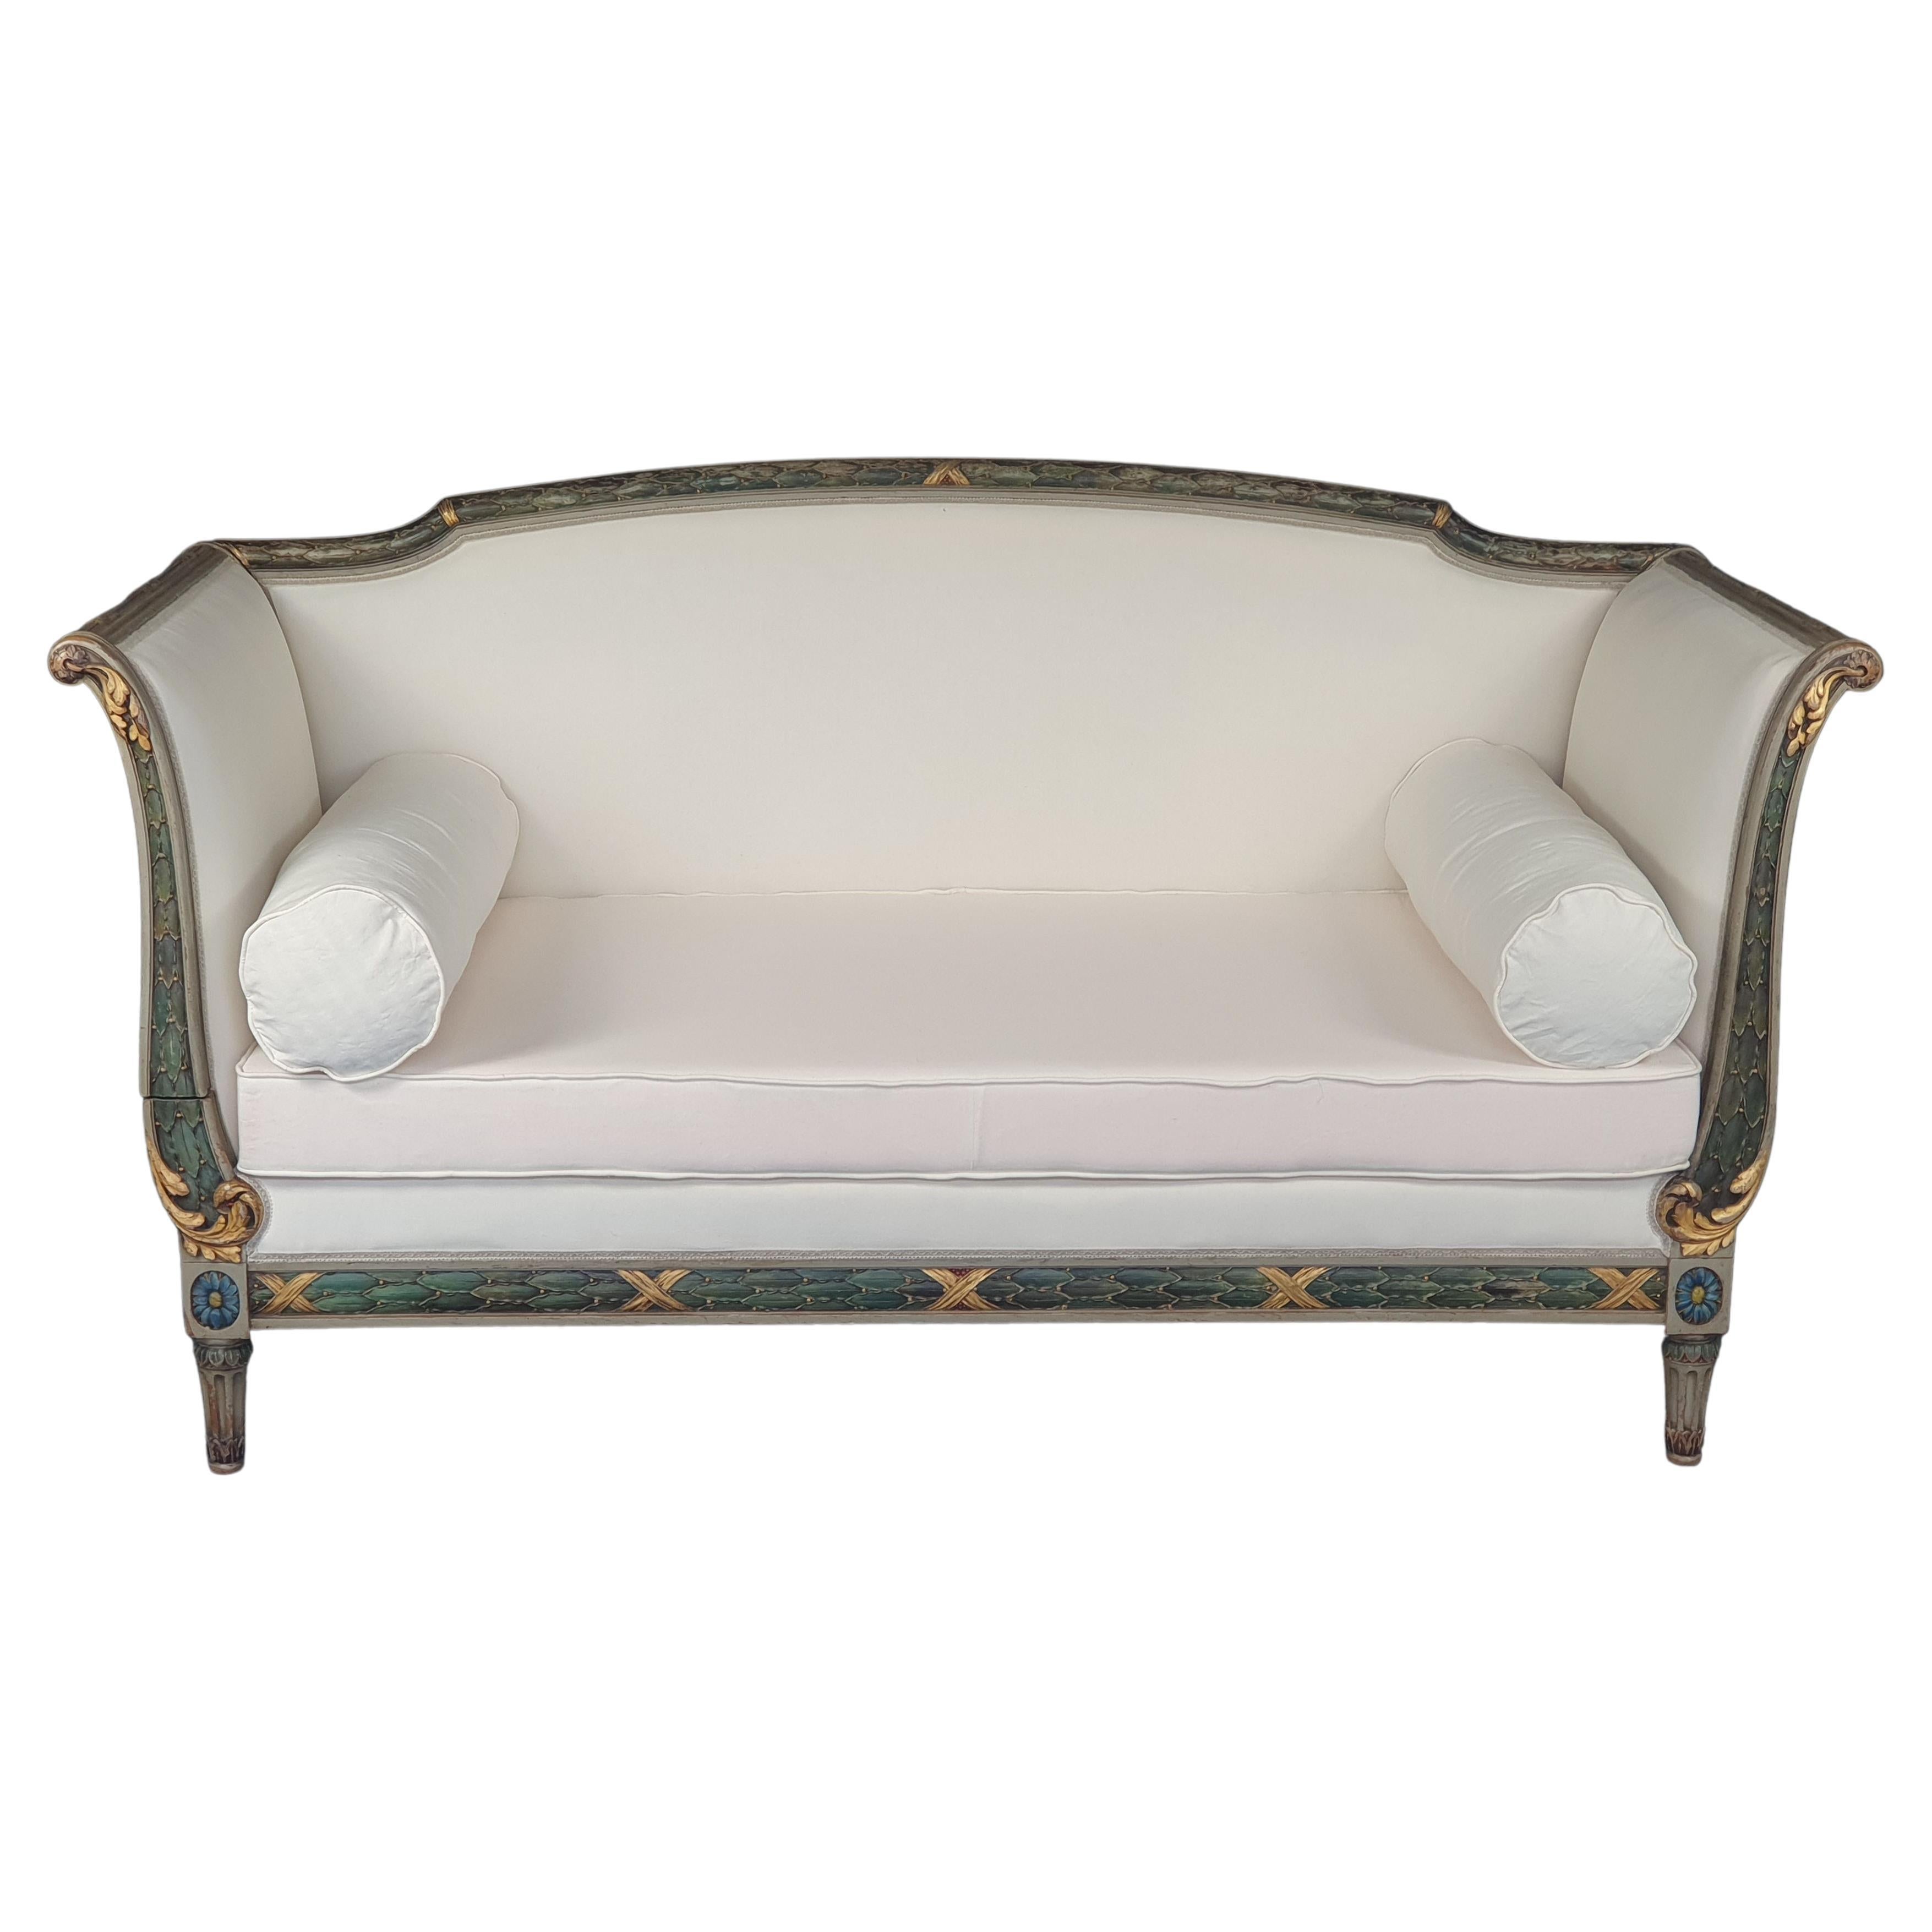 Large Louis XVI Sofa / Daybed in Rechampi and Gilded Lacquered Wood